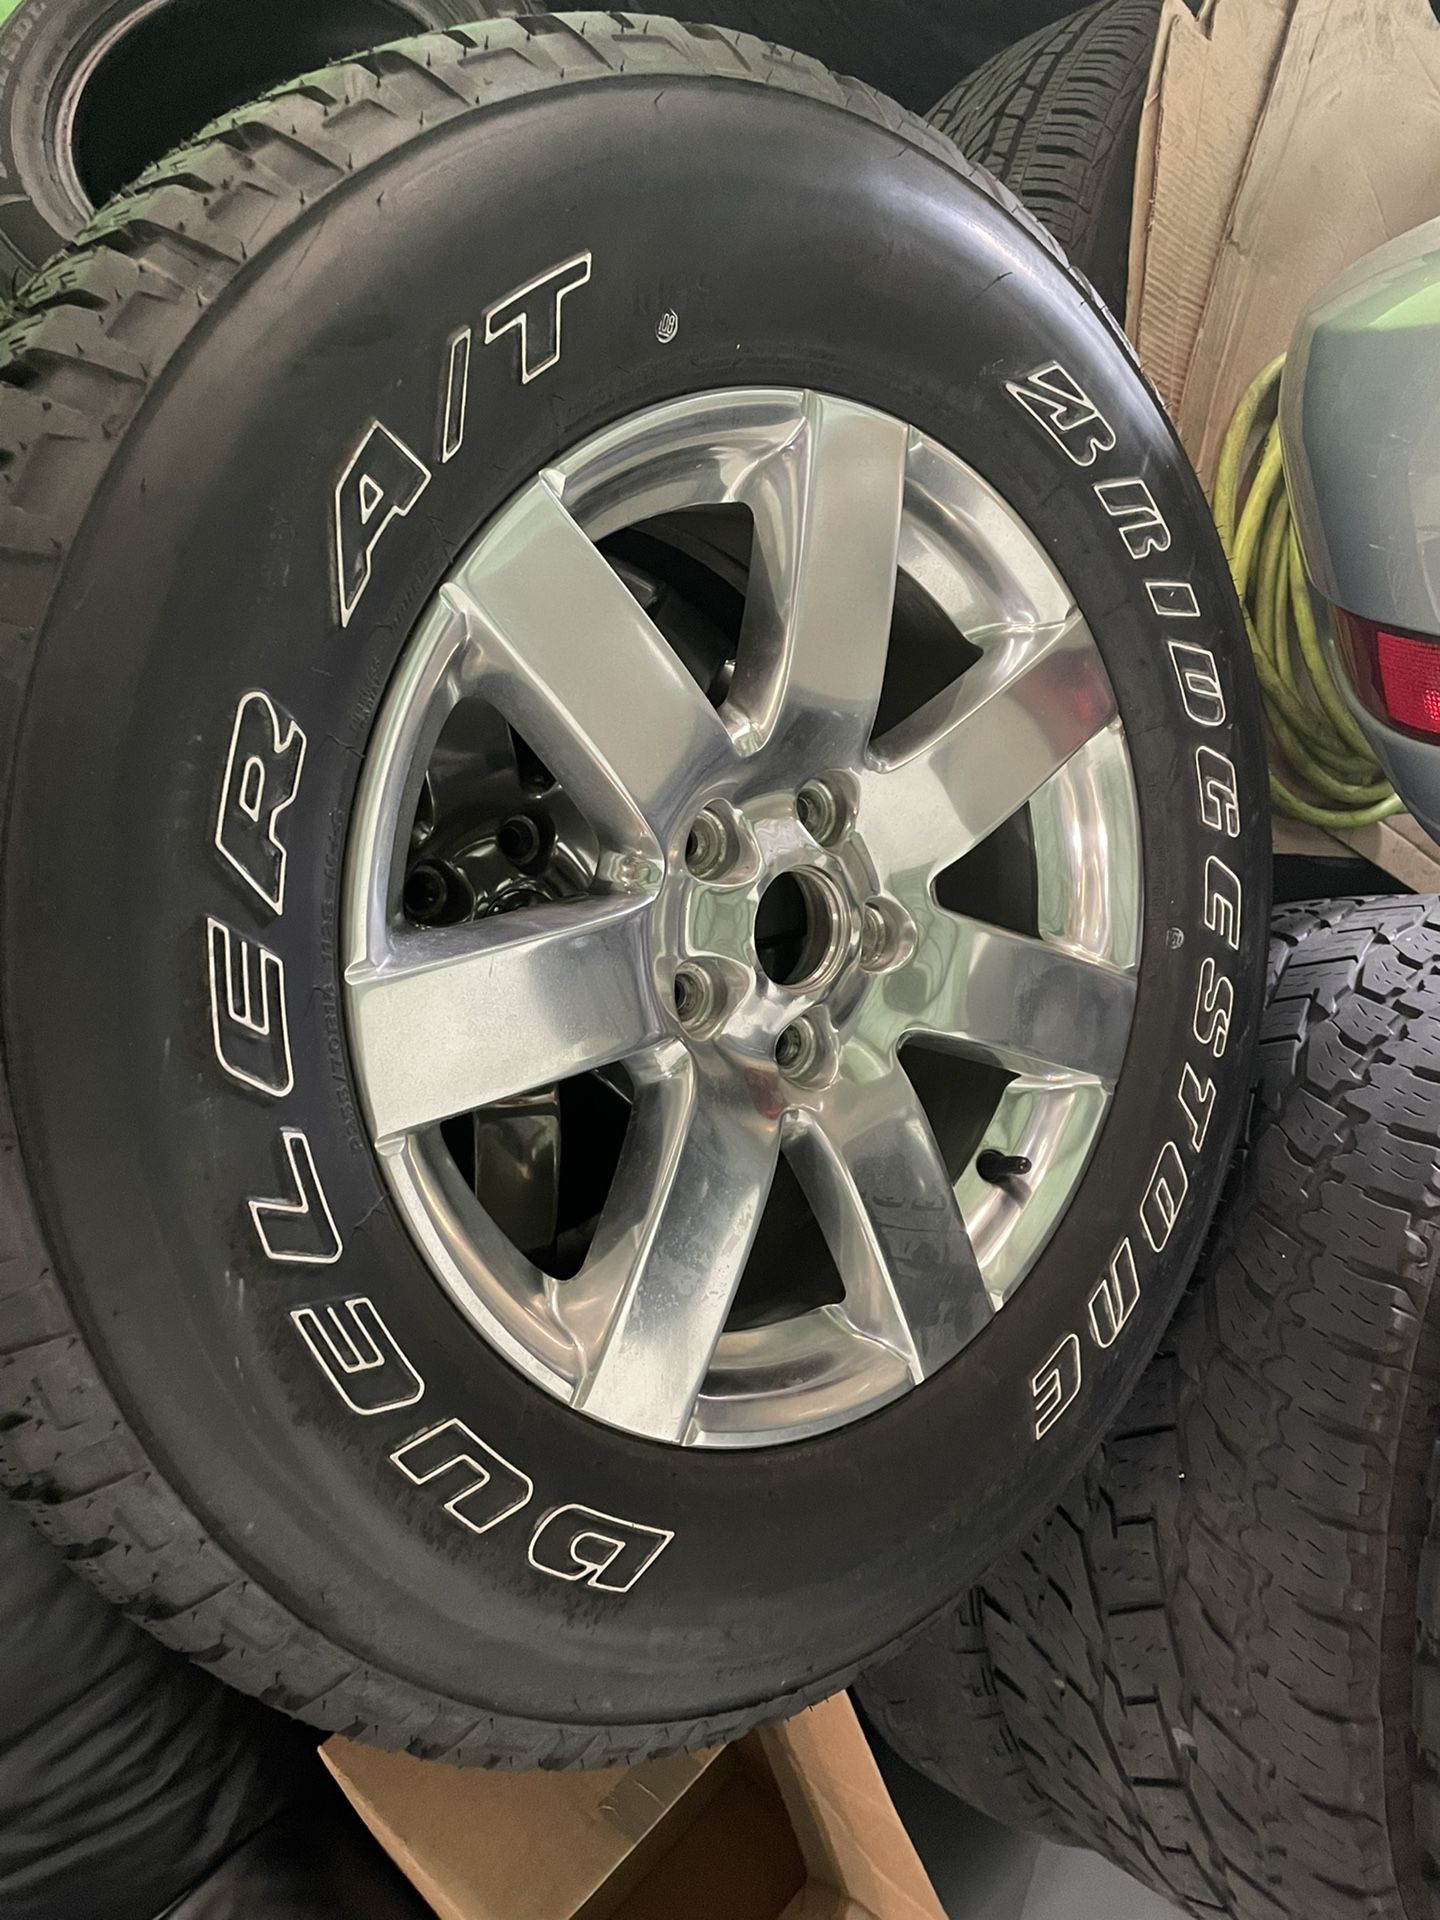  2016 Jeep Wrangler JK  Wheels And BF Goodrich tires